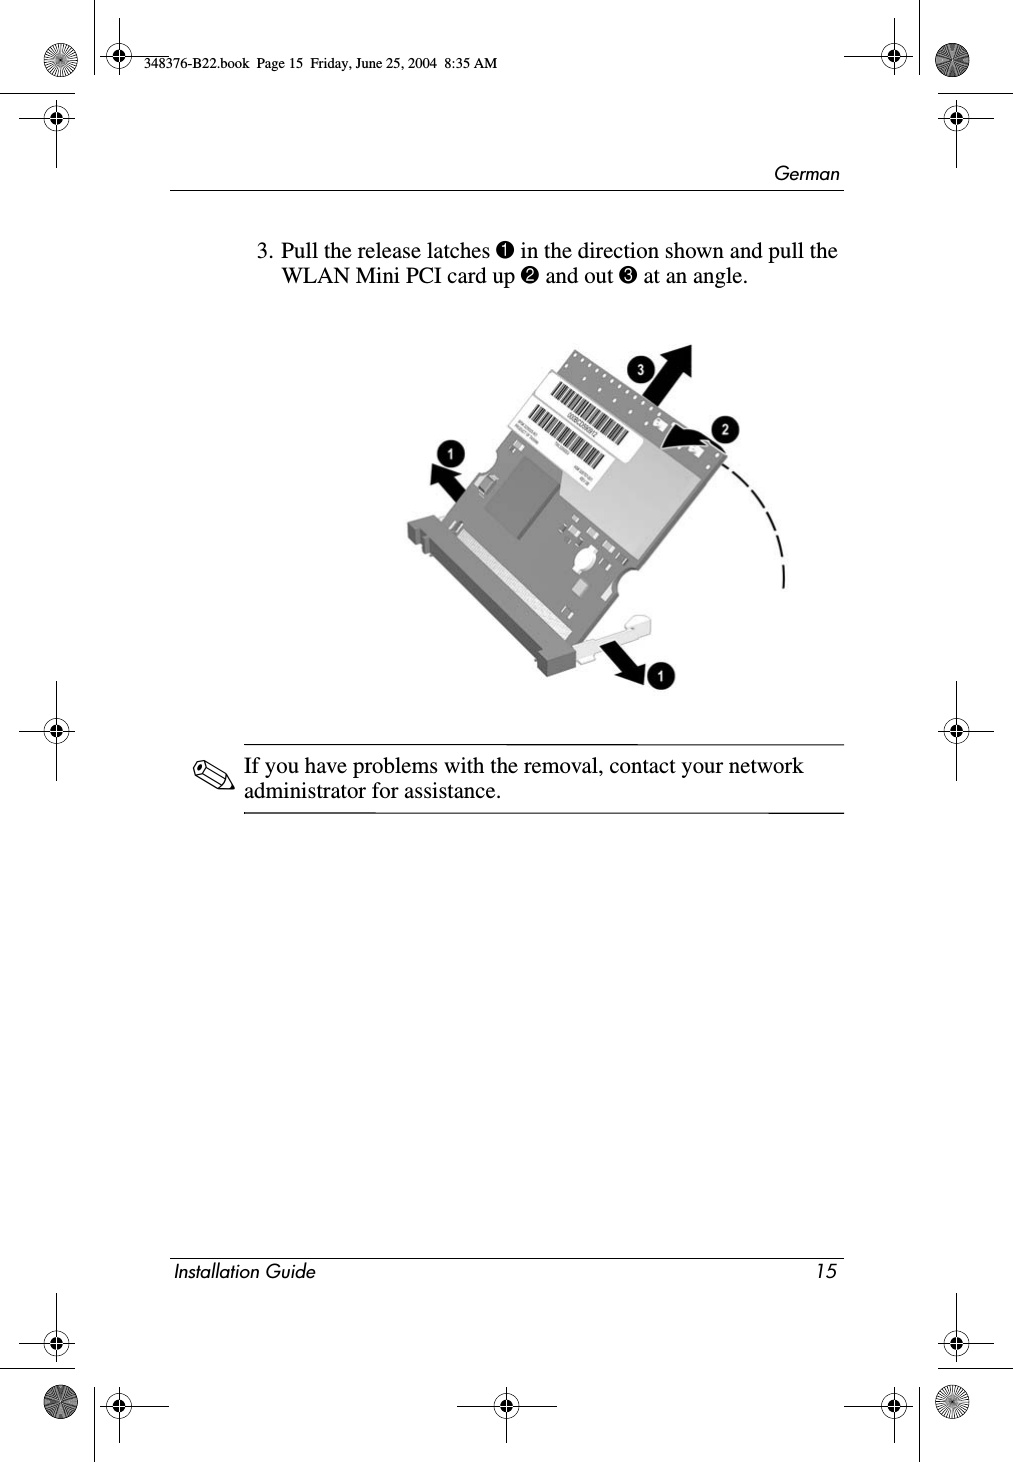 GermanInstallation Guide 153. Pull the release latches 1 in the direction shown and pull the WLAN Mini PCI card up 2 and out 3 at an angle.✎If you have problems with the removal, contact your network administrator for assistance.348376-B22.book  Page 15  Friday, June 25, 2004  8:35 AM